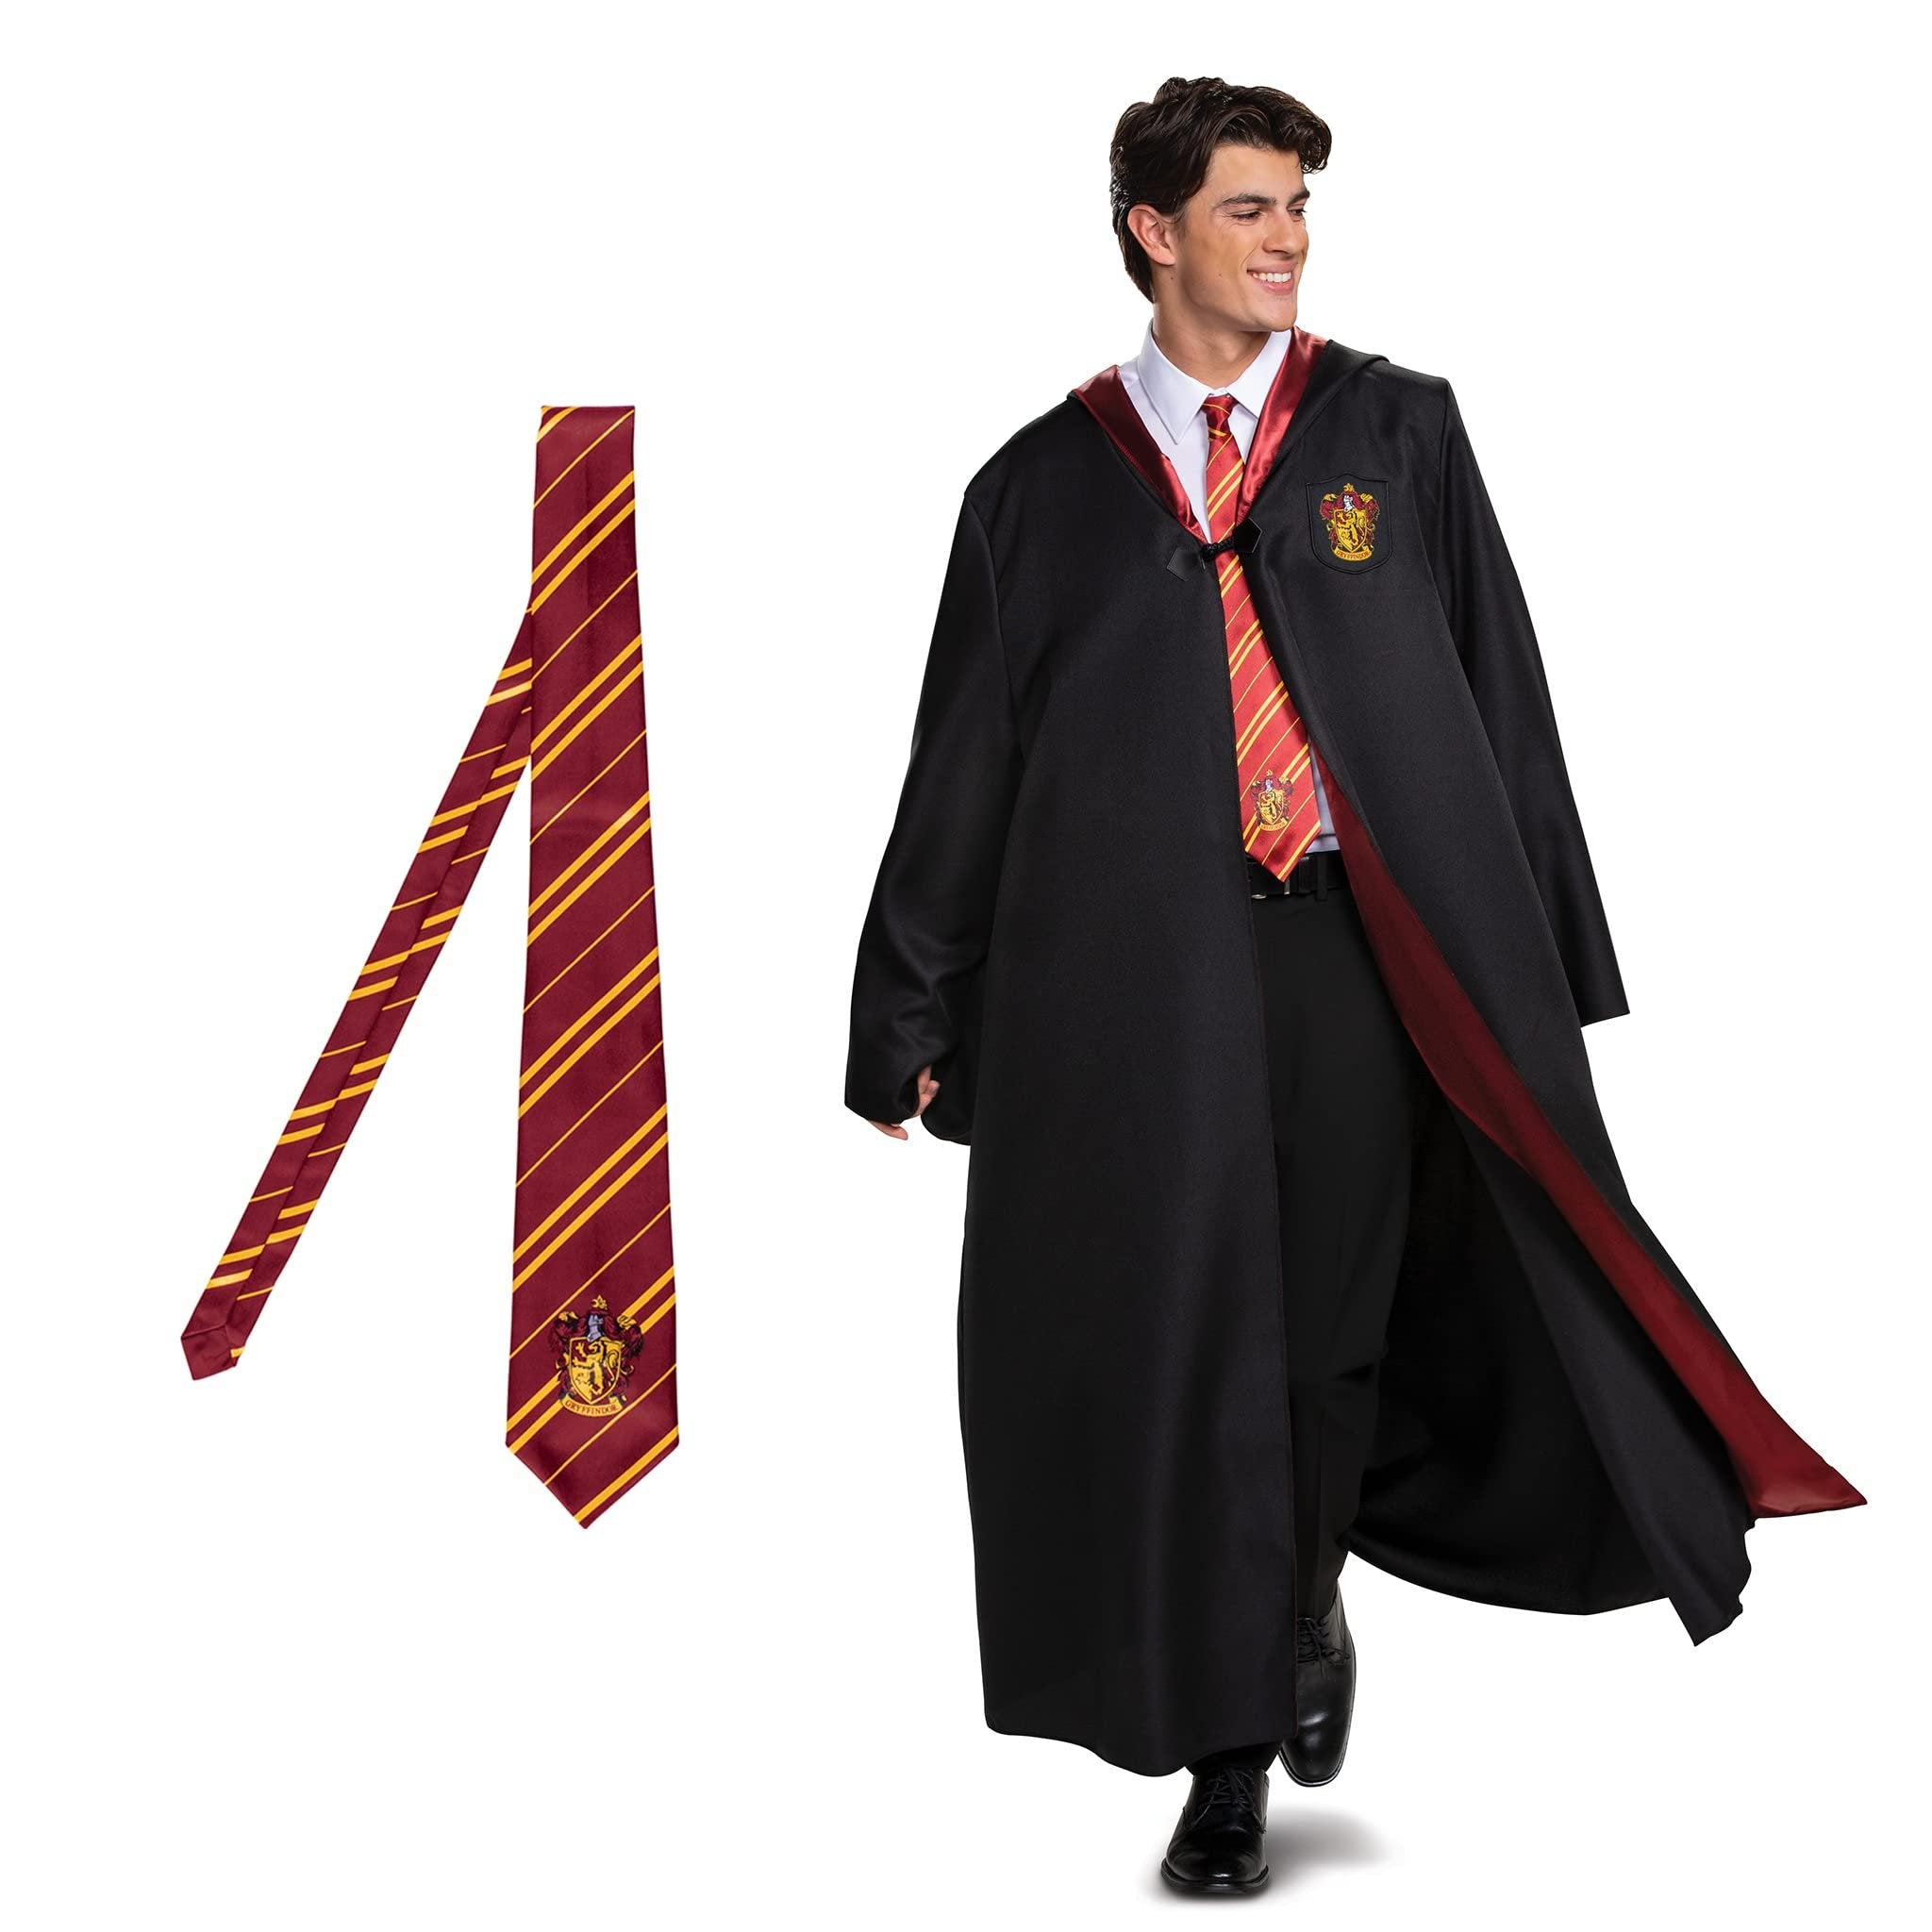 Disguise Harry Potter Gryffindor Costume Combo, Deluxe Hooded Robe with Tie for Adults, As Shown, Extra Small (14-16)